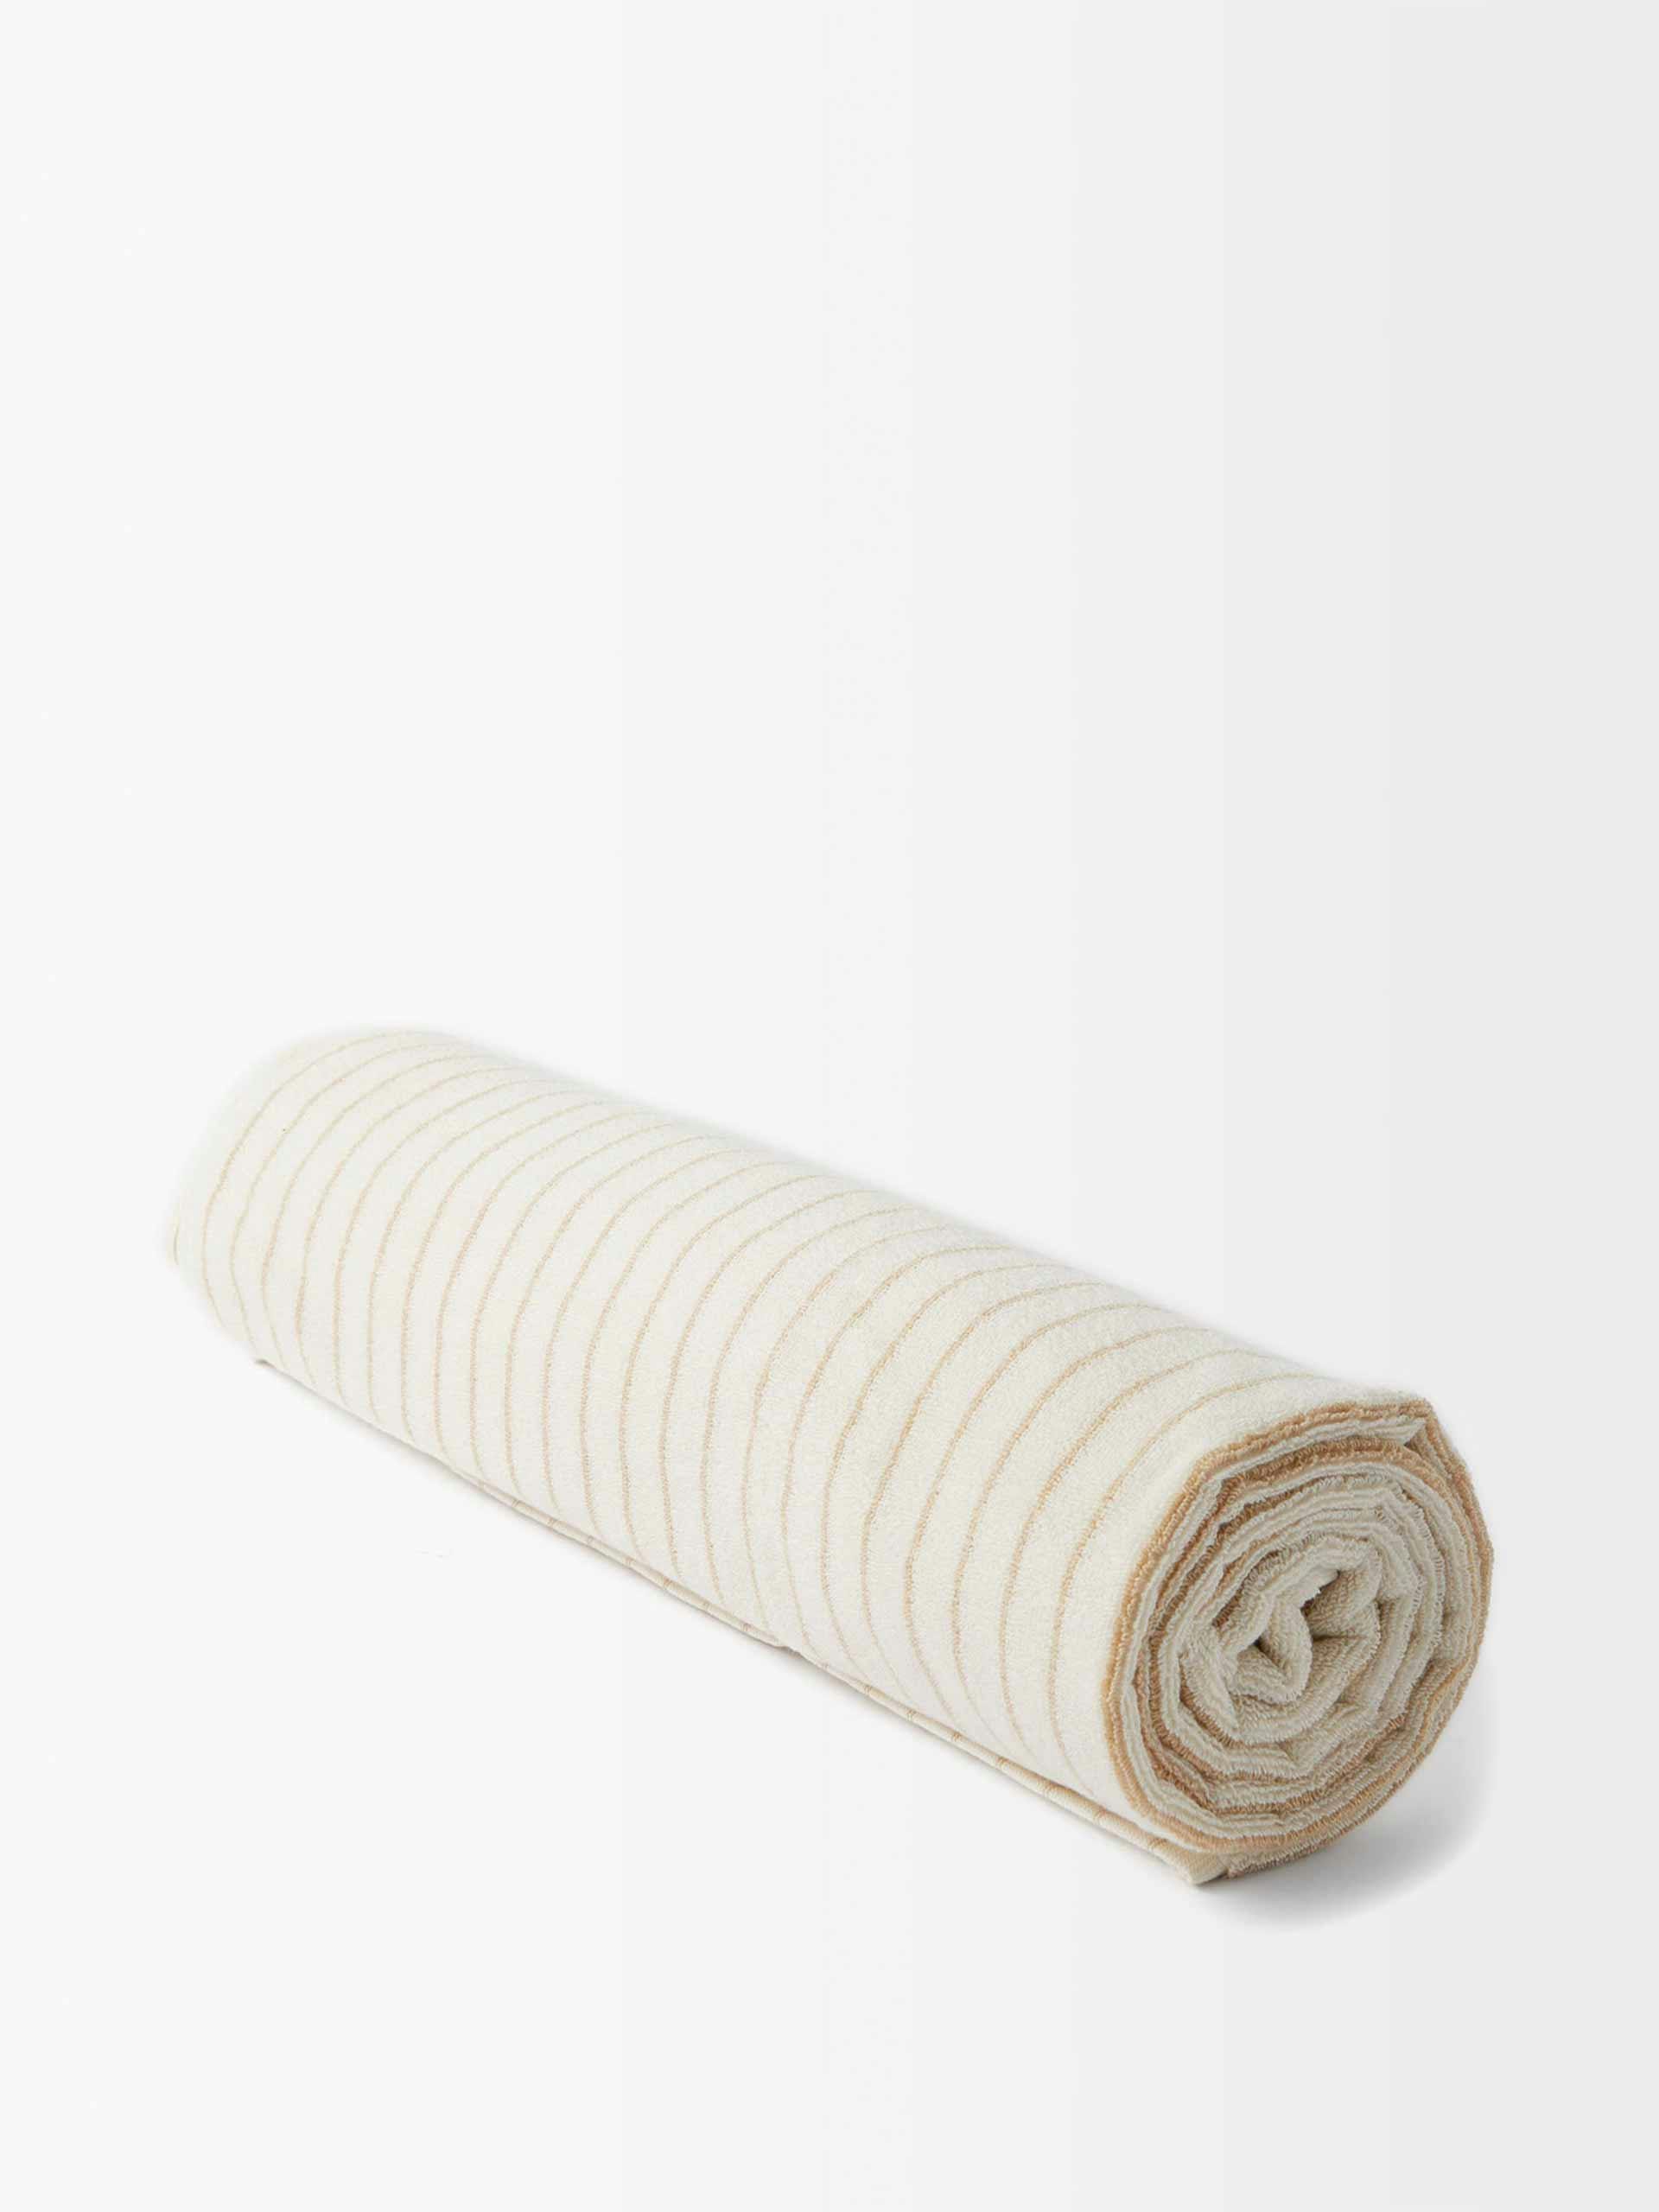 White and beige striped towel